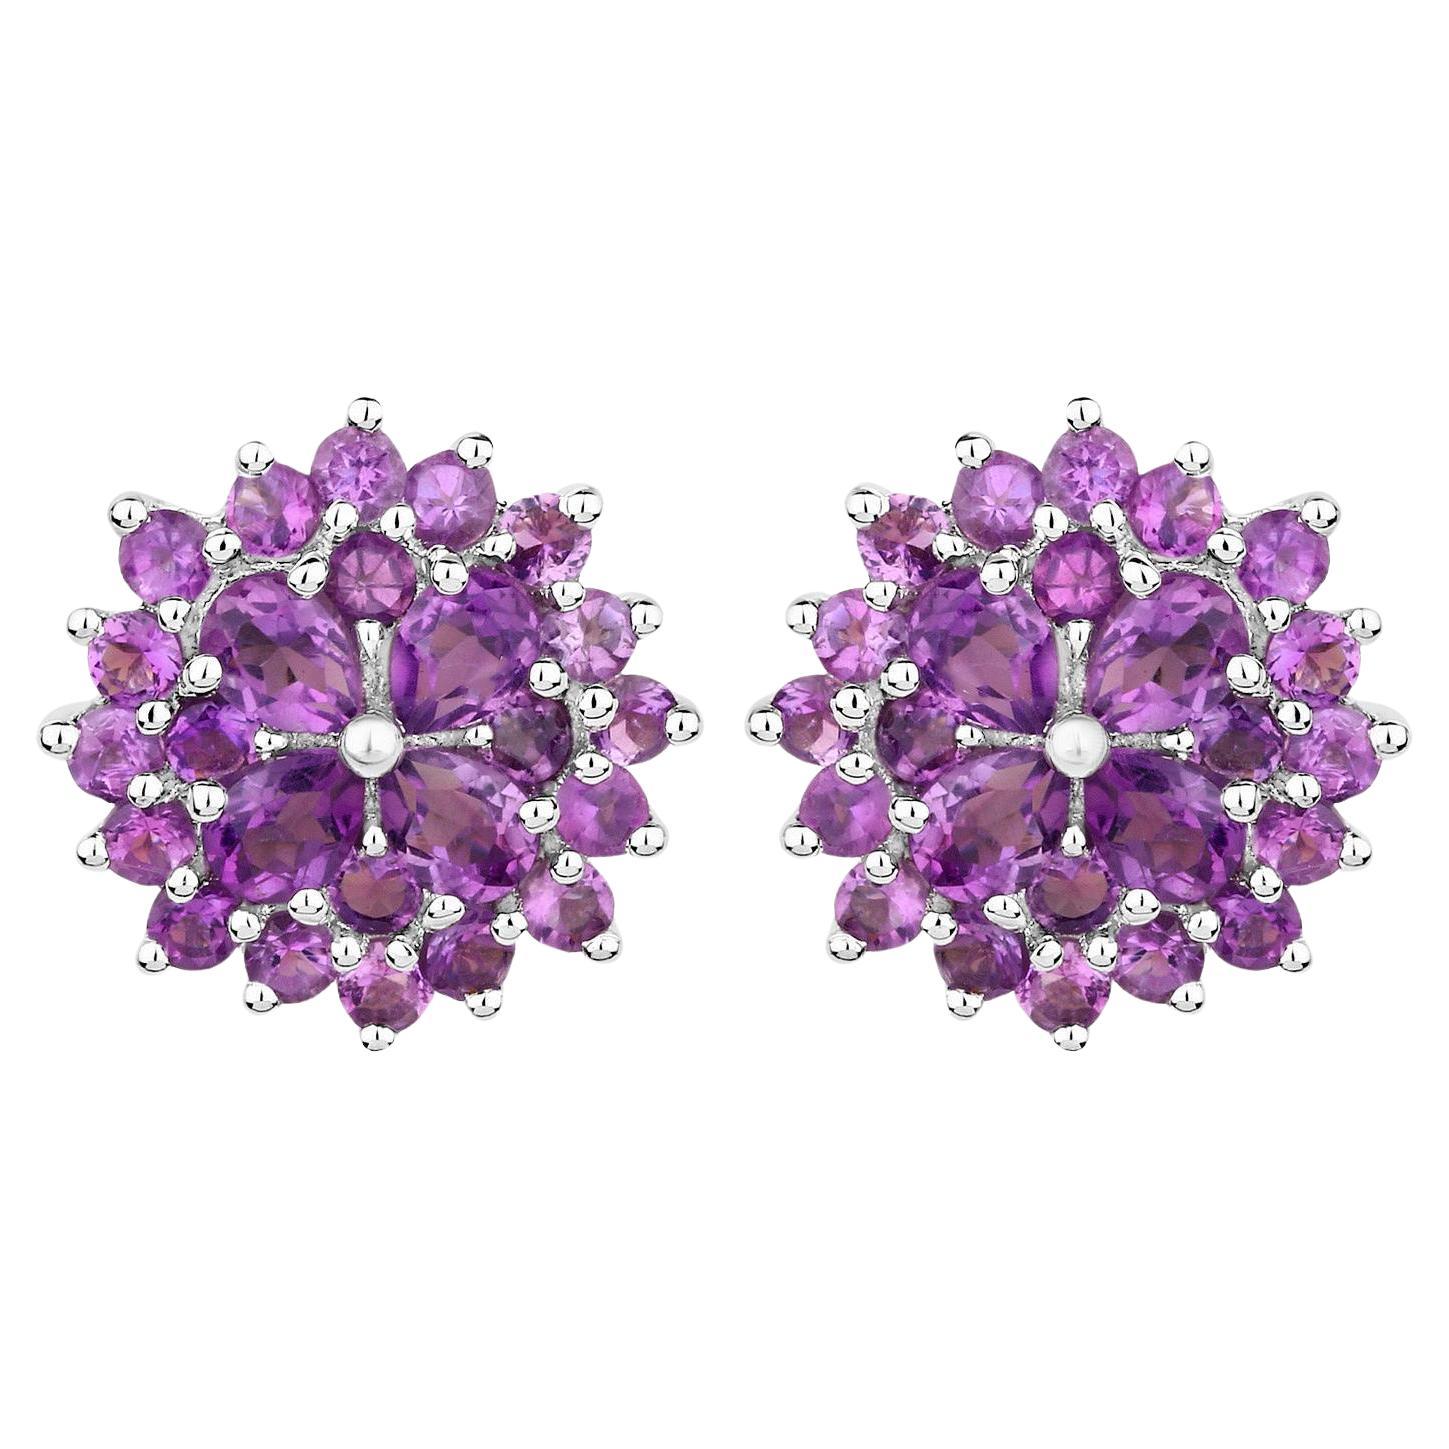 Amethyst Stud Earrings 2.40 Carats Rhodium Plated Sterling Silver